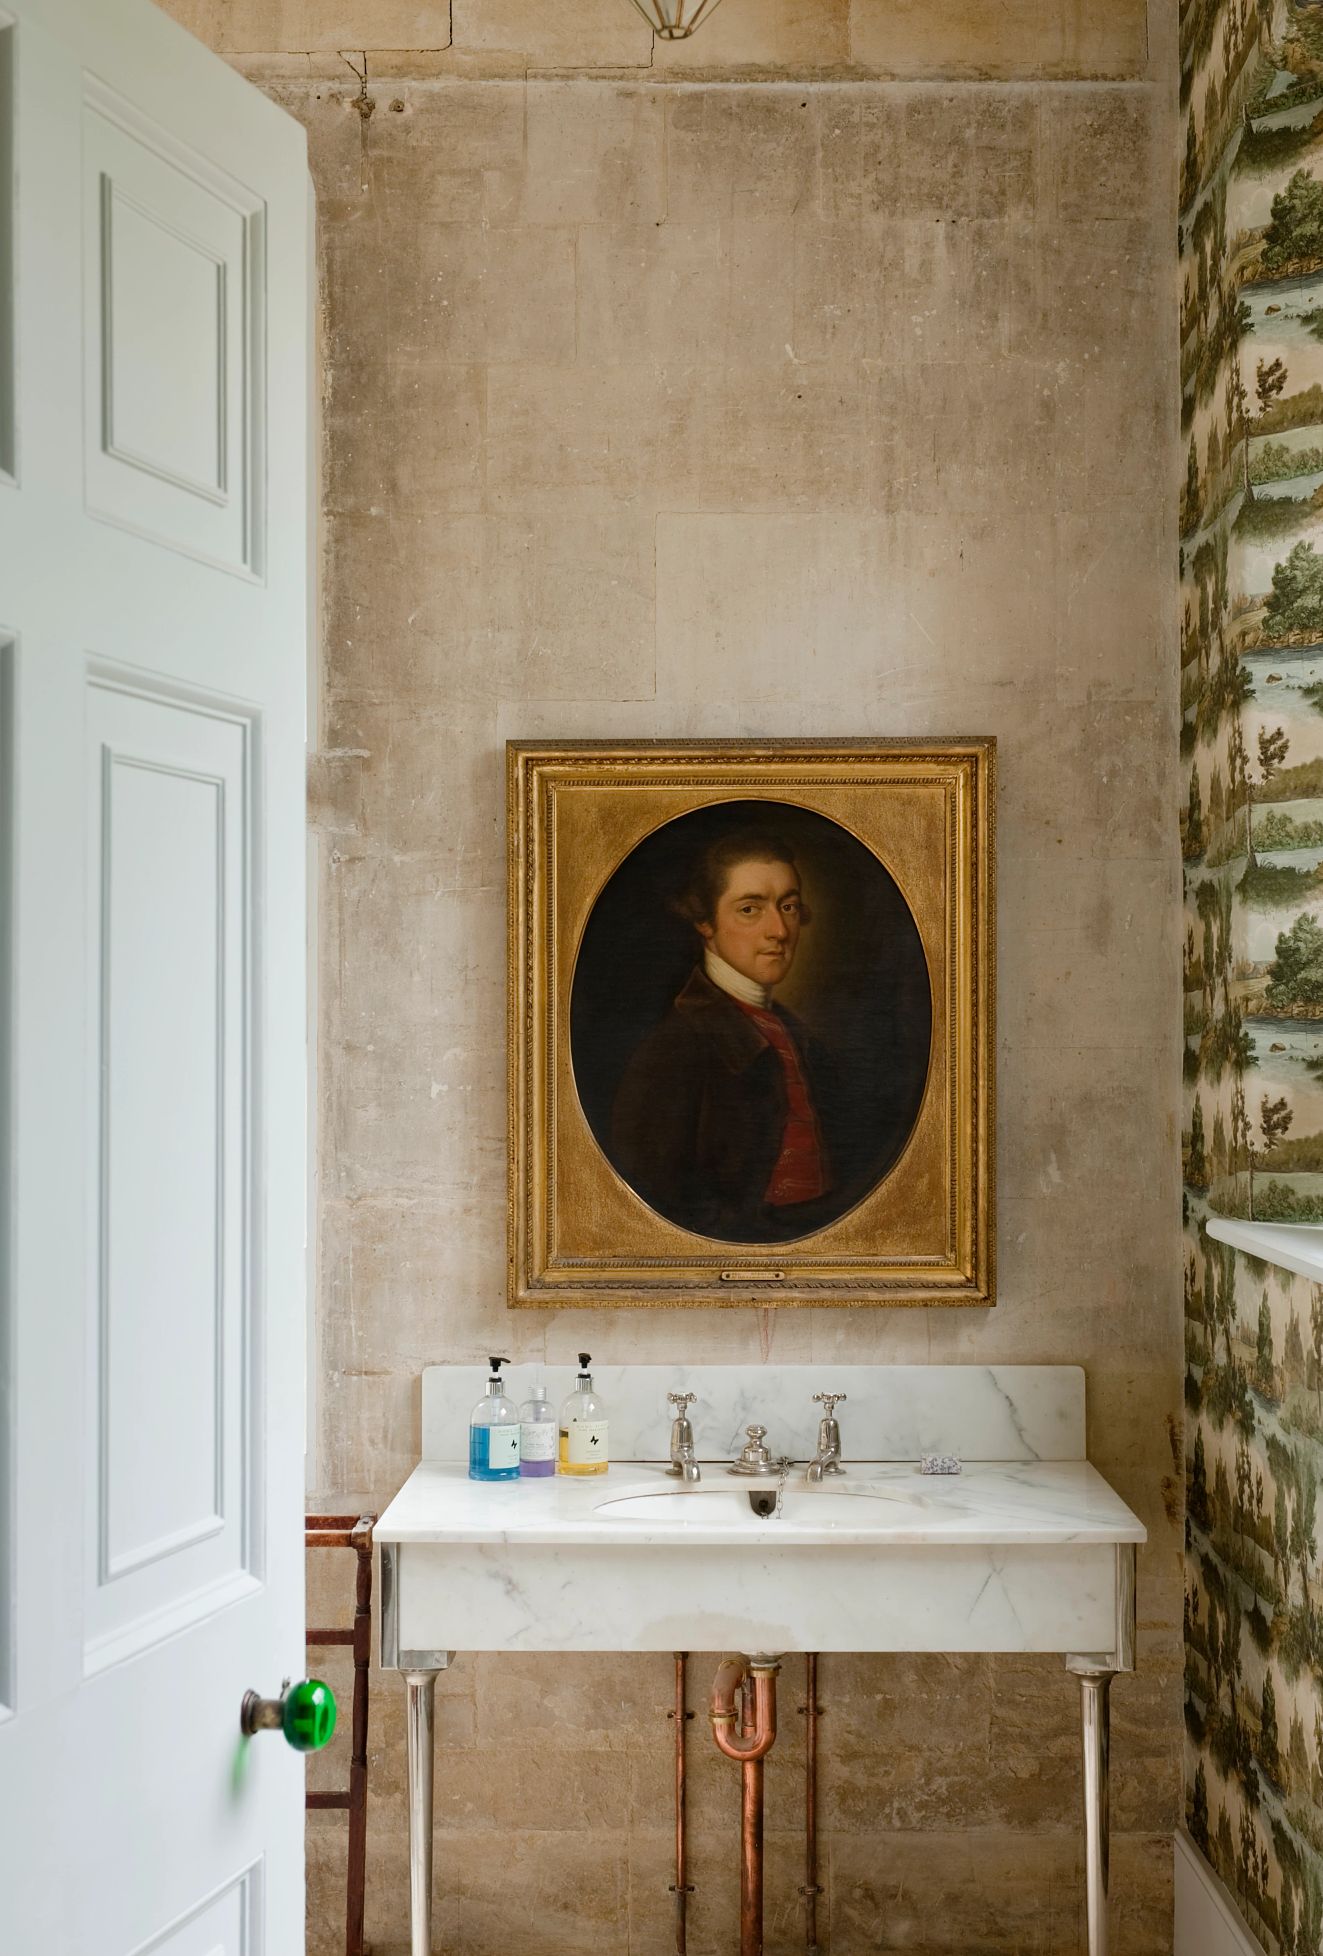 OIl painting above wash basin in a bathroom